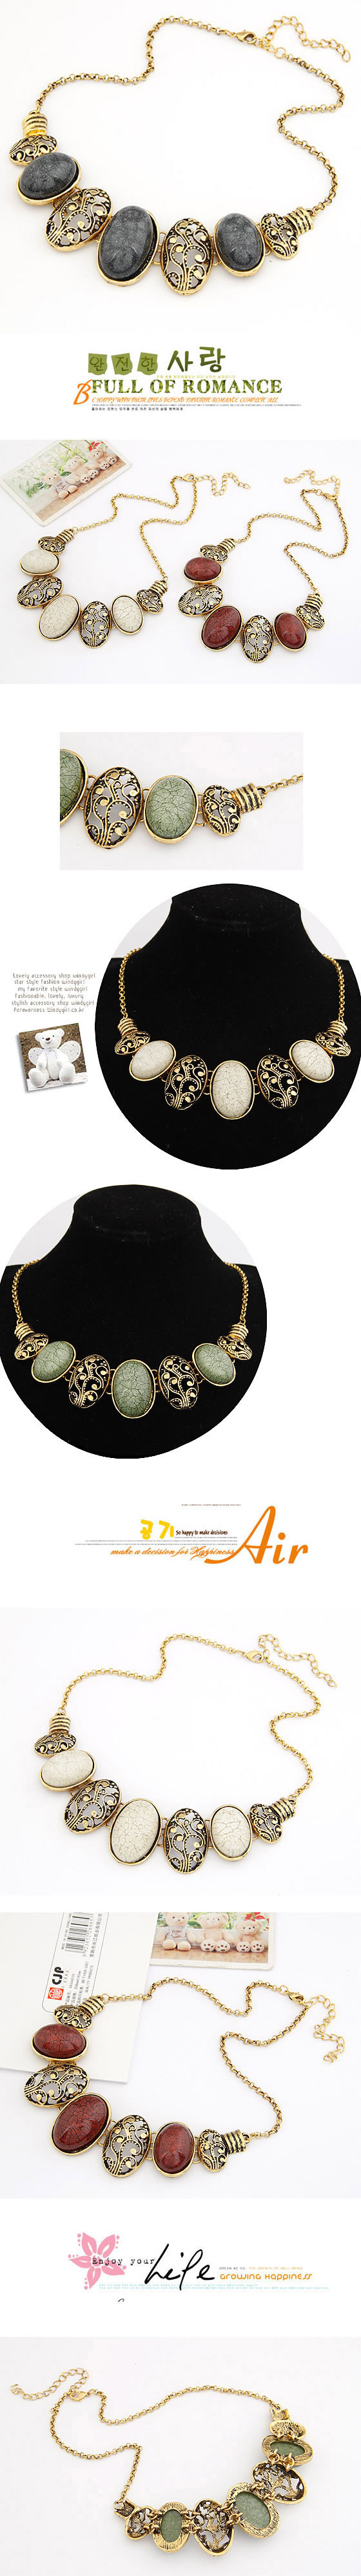 Bendable Gray Hollow Out Oval Shape Alloy Bib Necklaces,Bib Necklaces